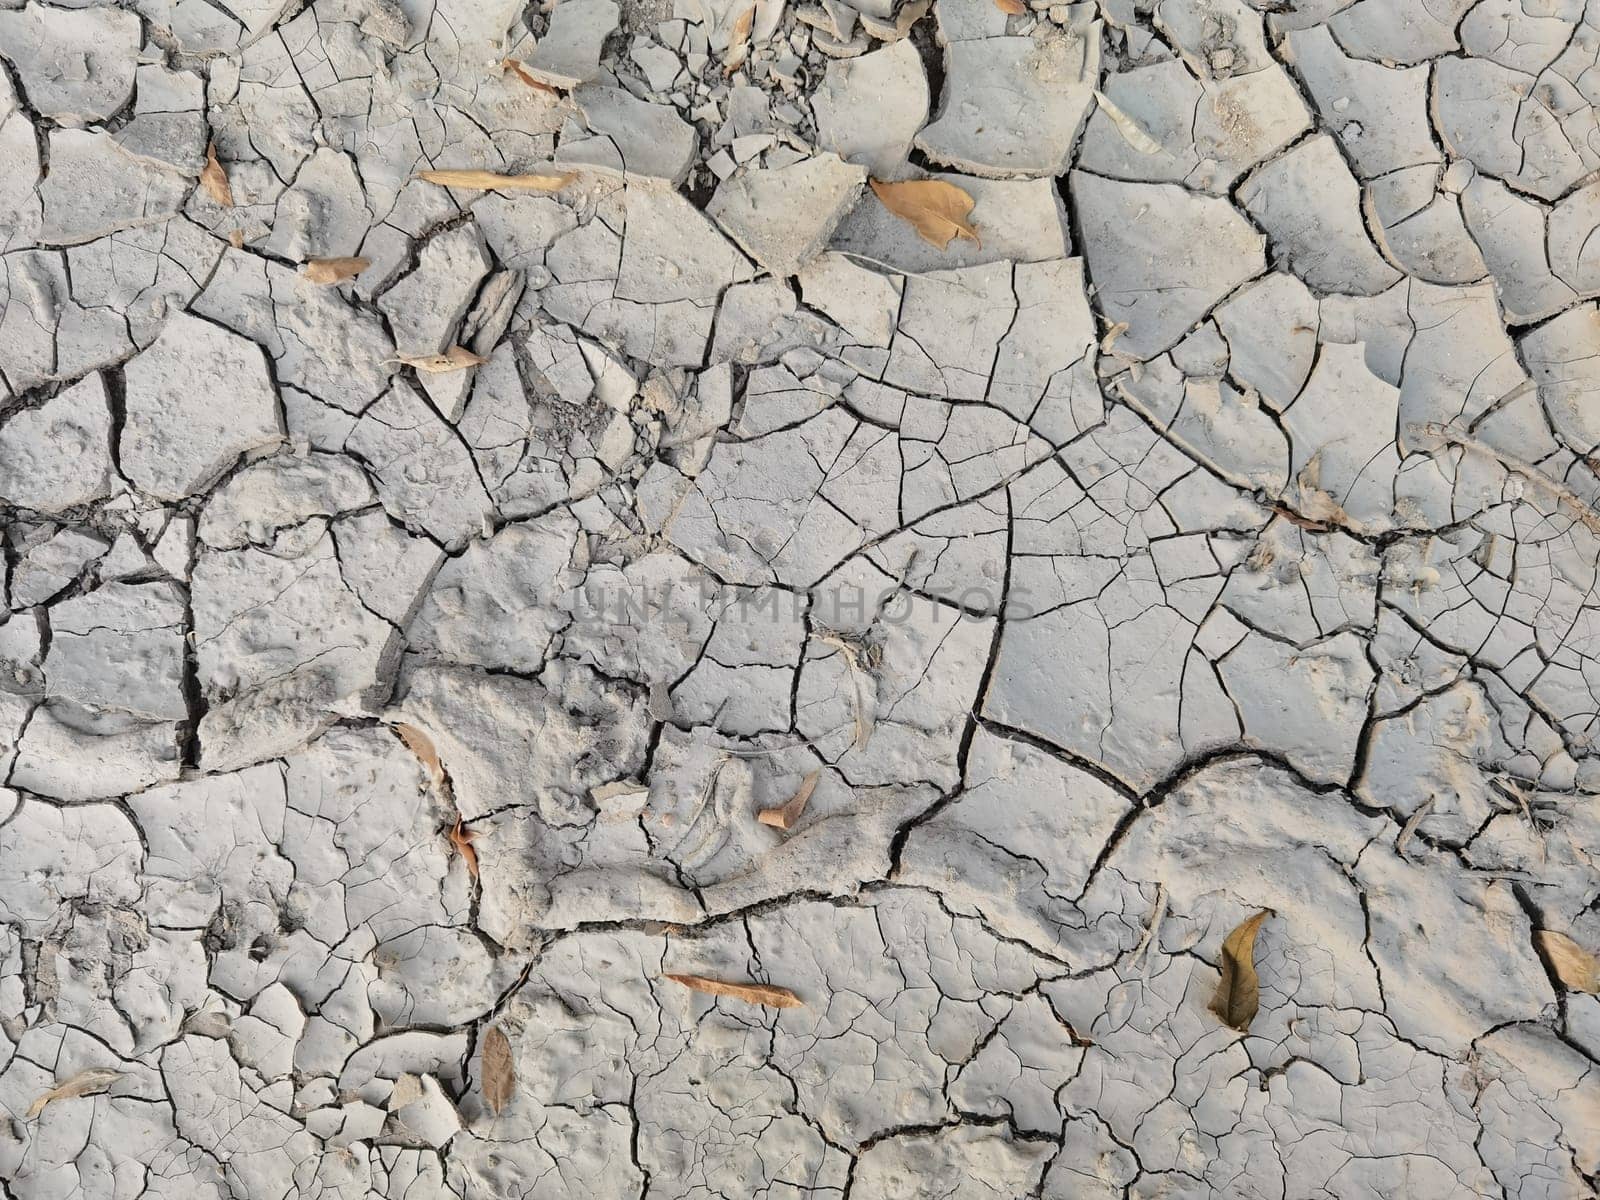 Drought, earth cracks, natural disasters. Dry cracked earth as a background close-up. Environmental disaster. Drought. by sarymsakov